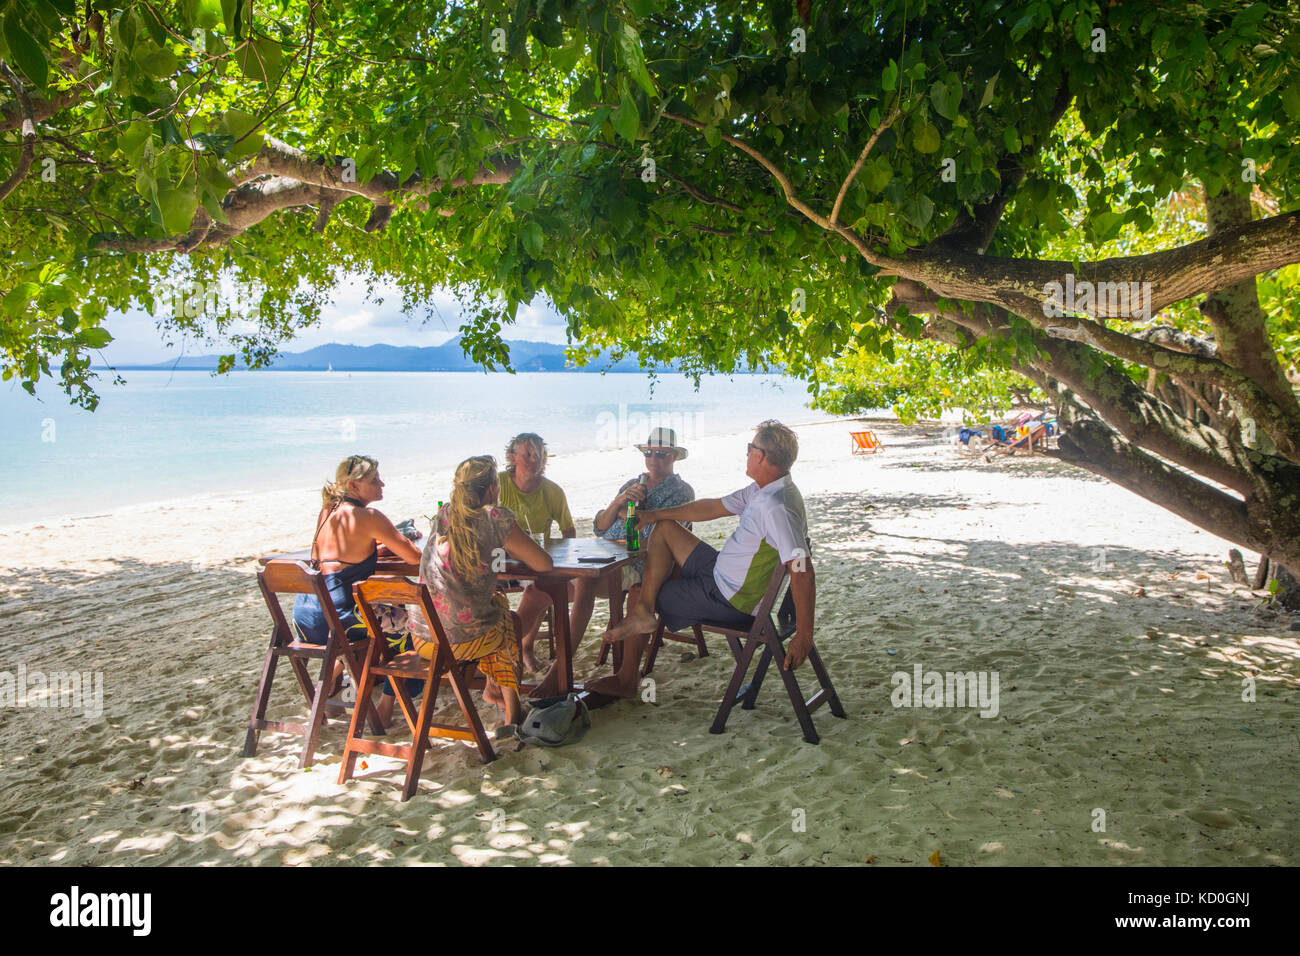 Friends relaxing at dining table on beach, Koh Rang Yai, Thailand, Asia Stock Photo